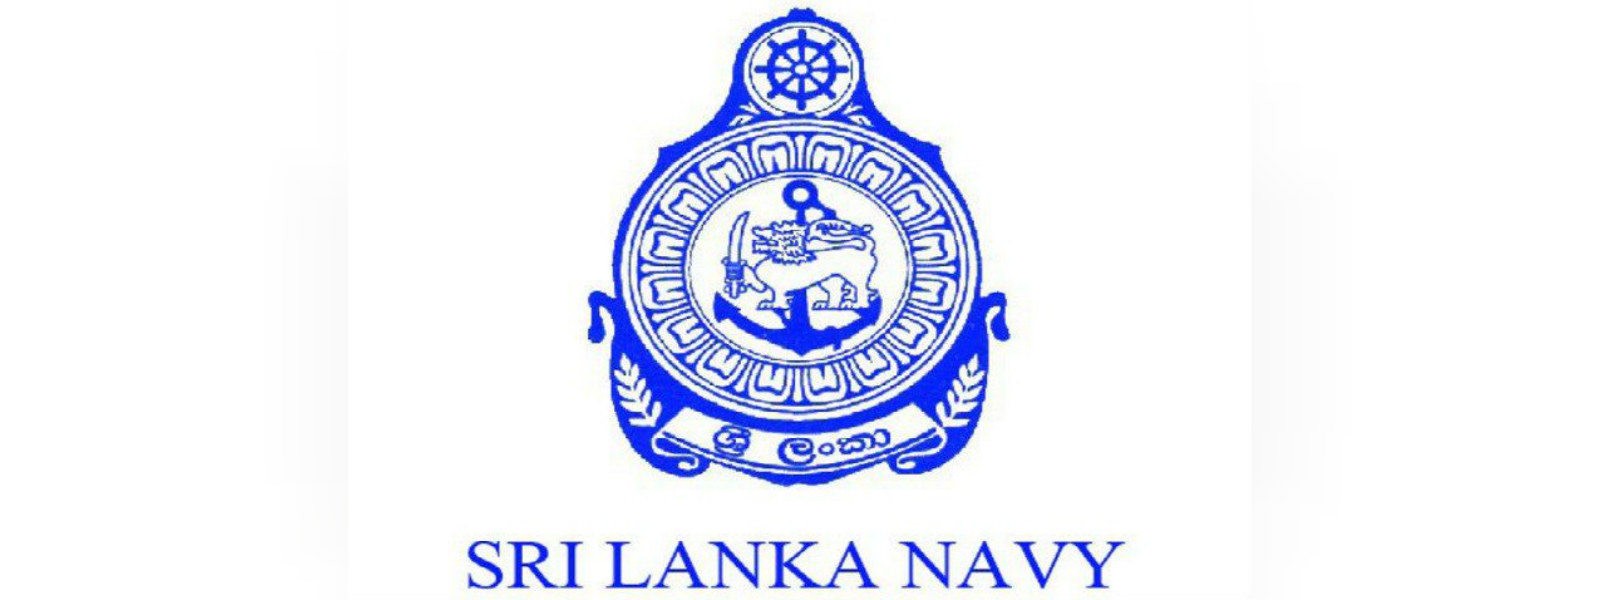 Navy discovers 85kg of suspected heroin 